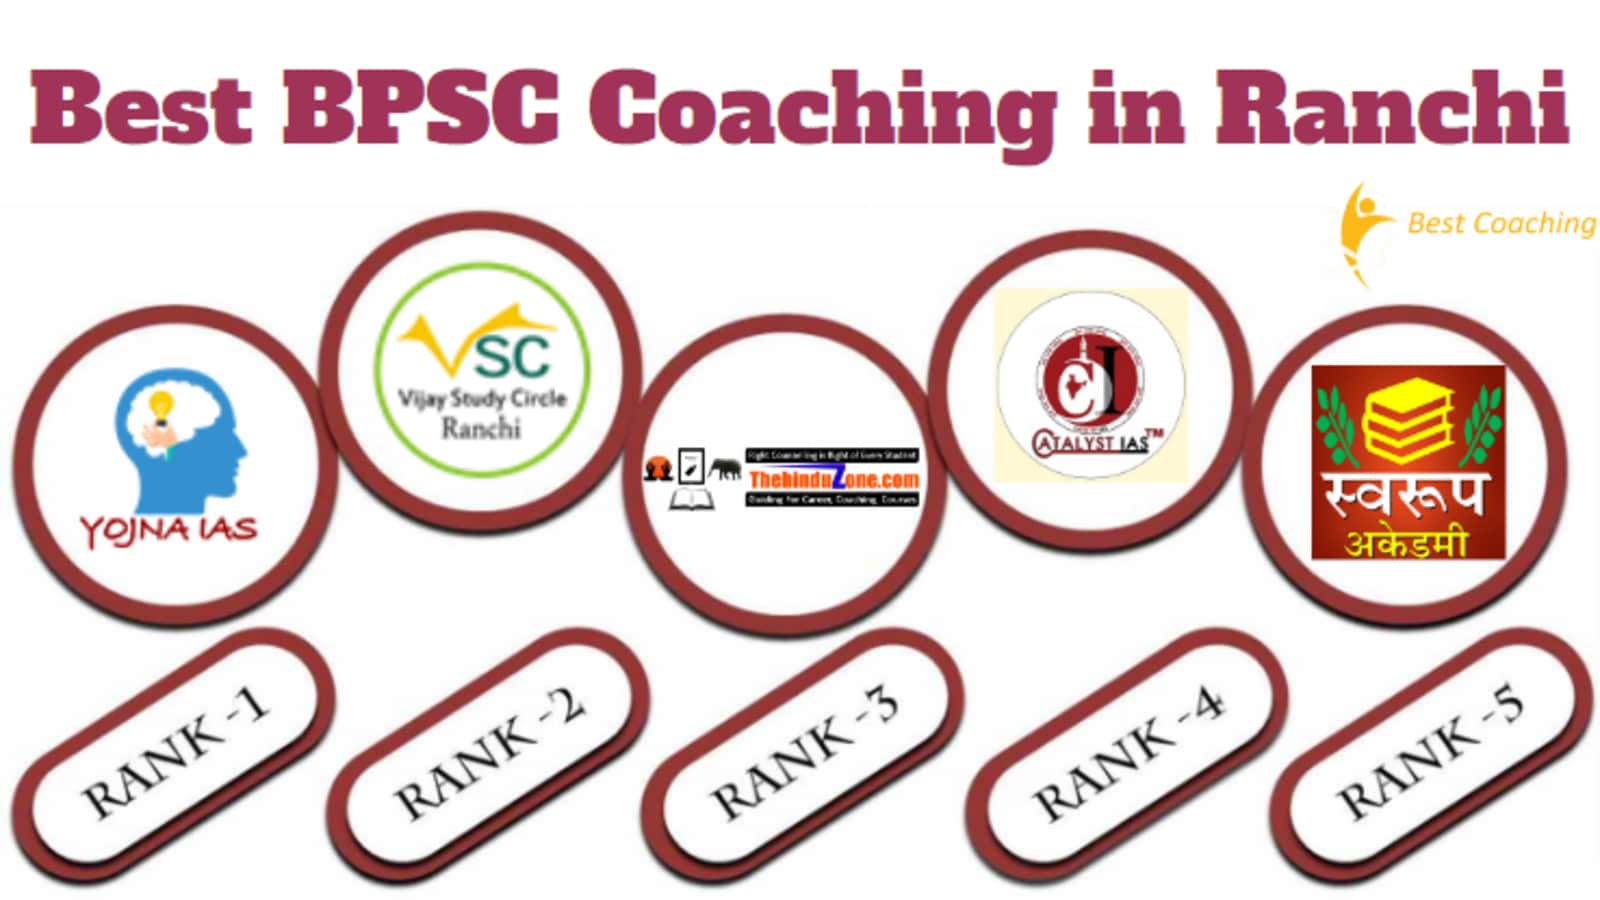 Best BPSC Coaching in Ranchi